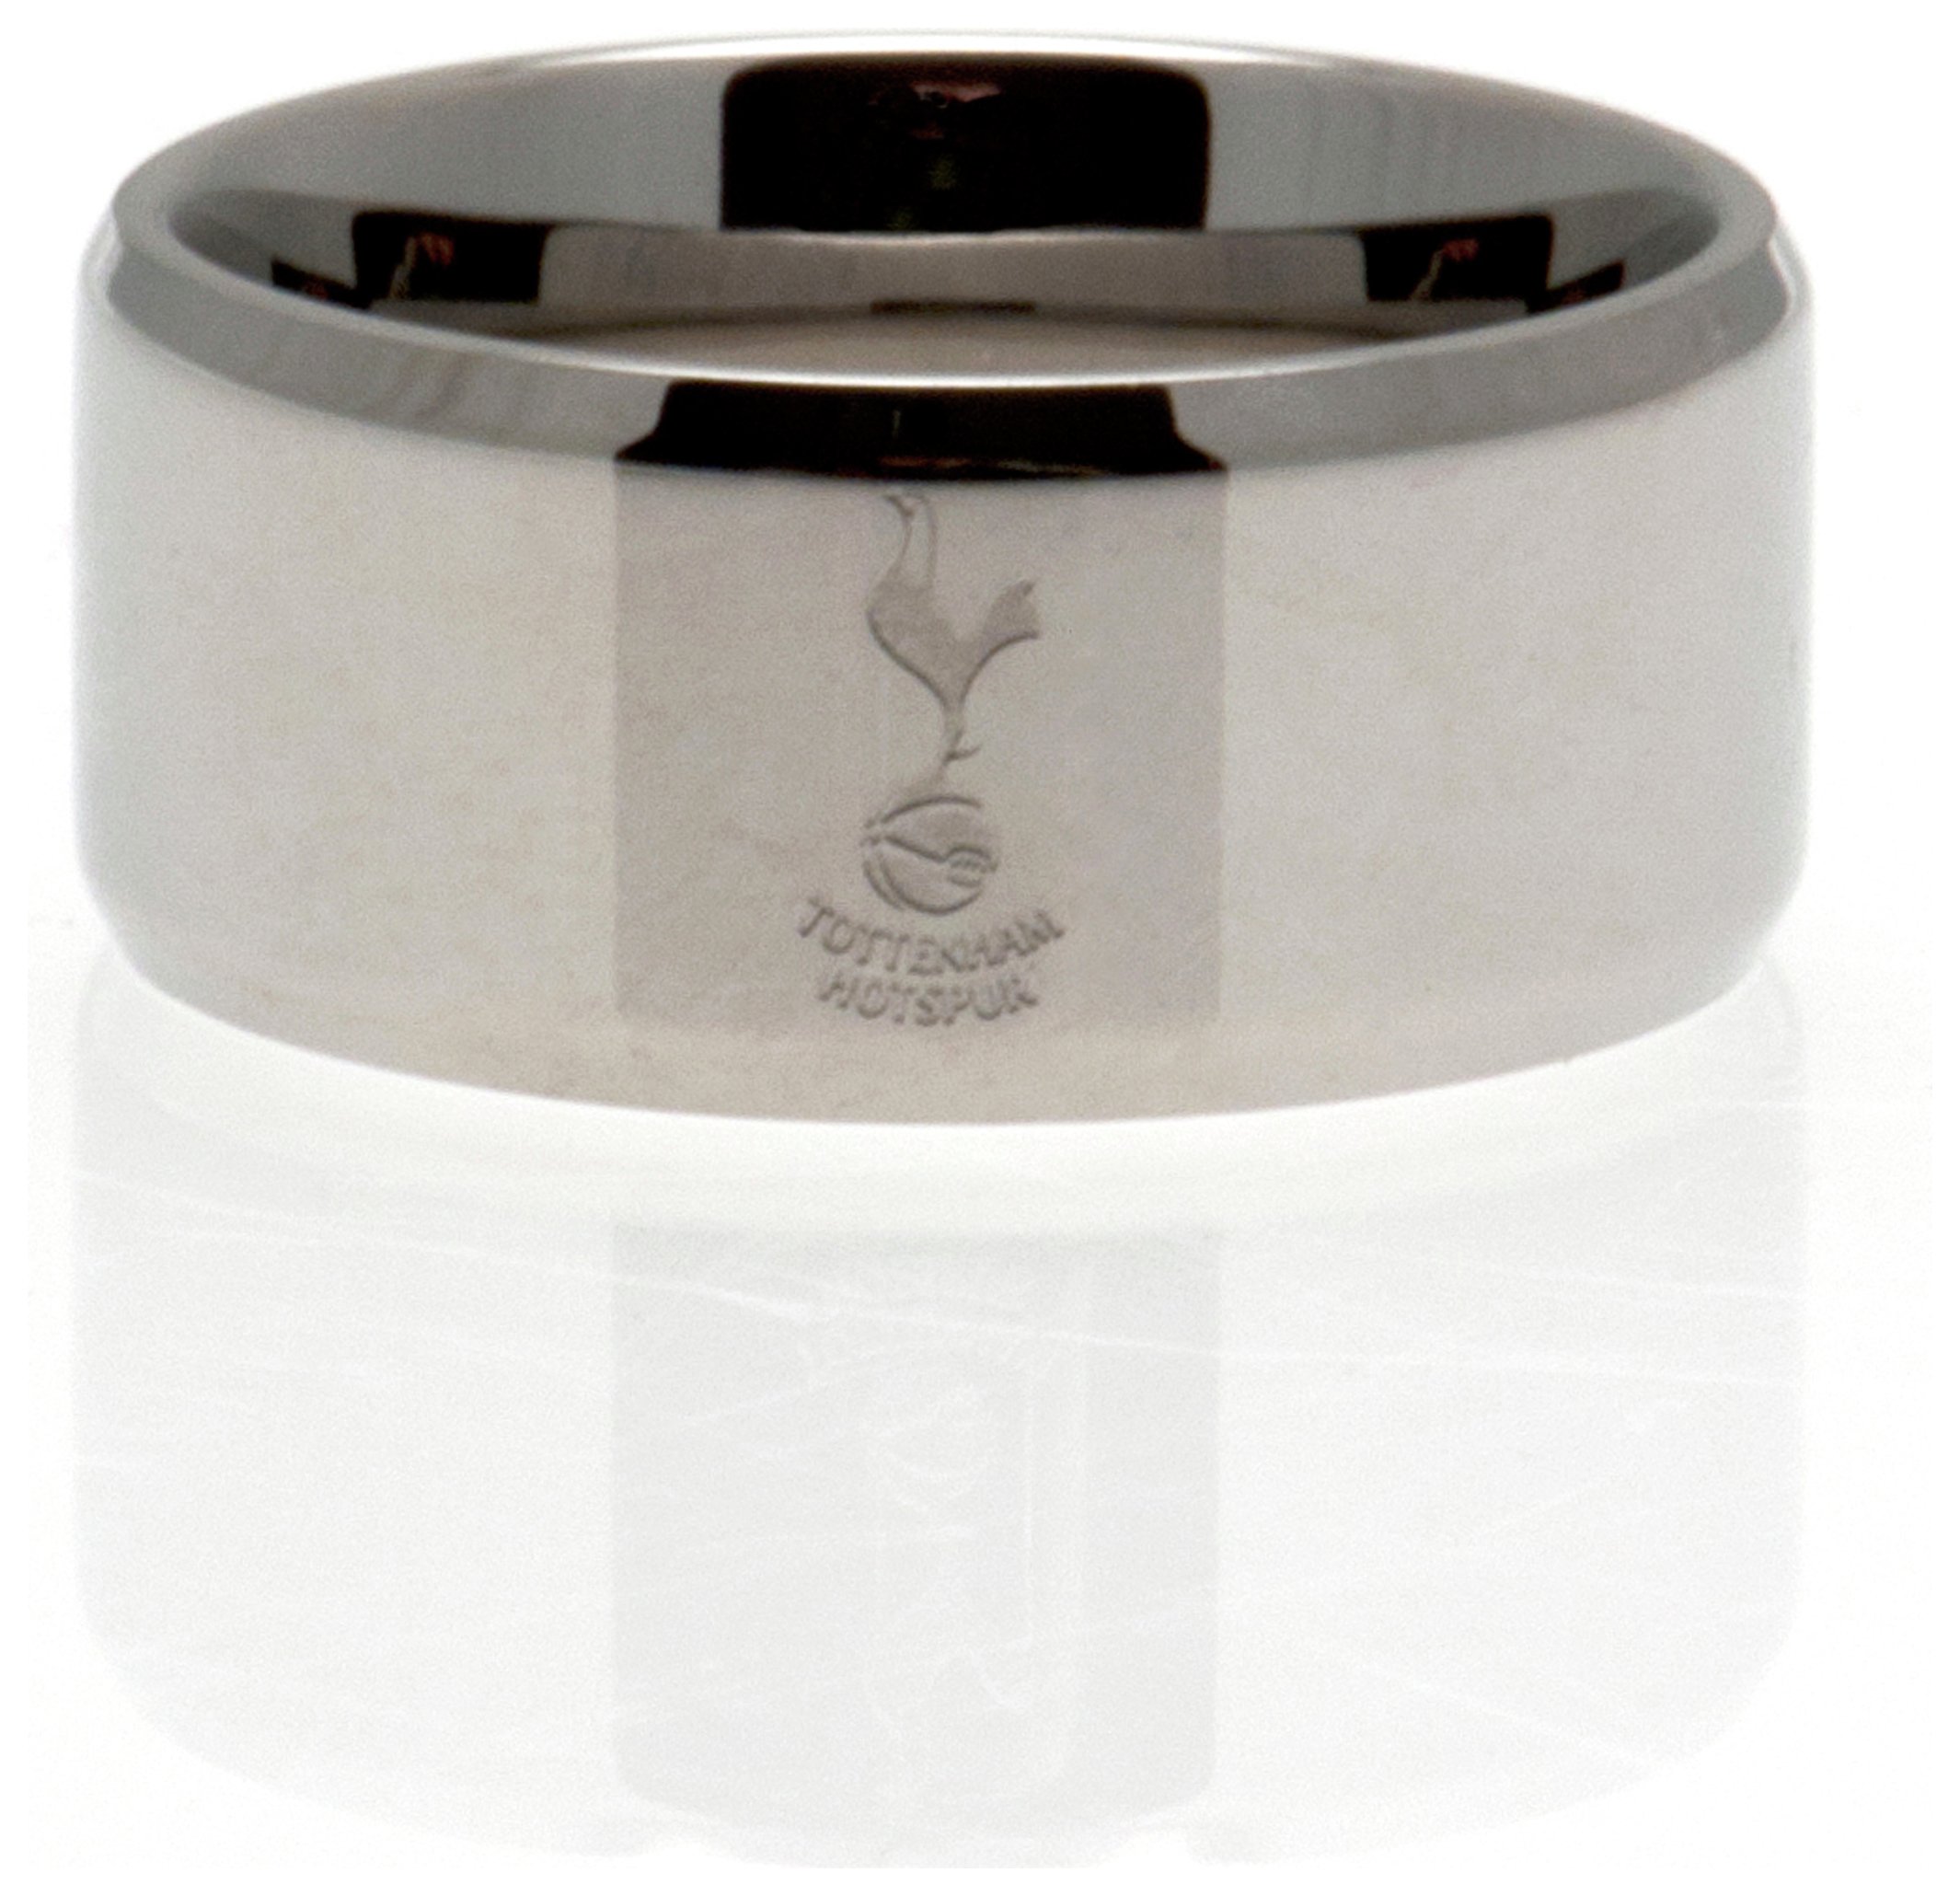 Stainless Steel Tottenham Hotspur Ring - Size R